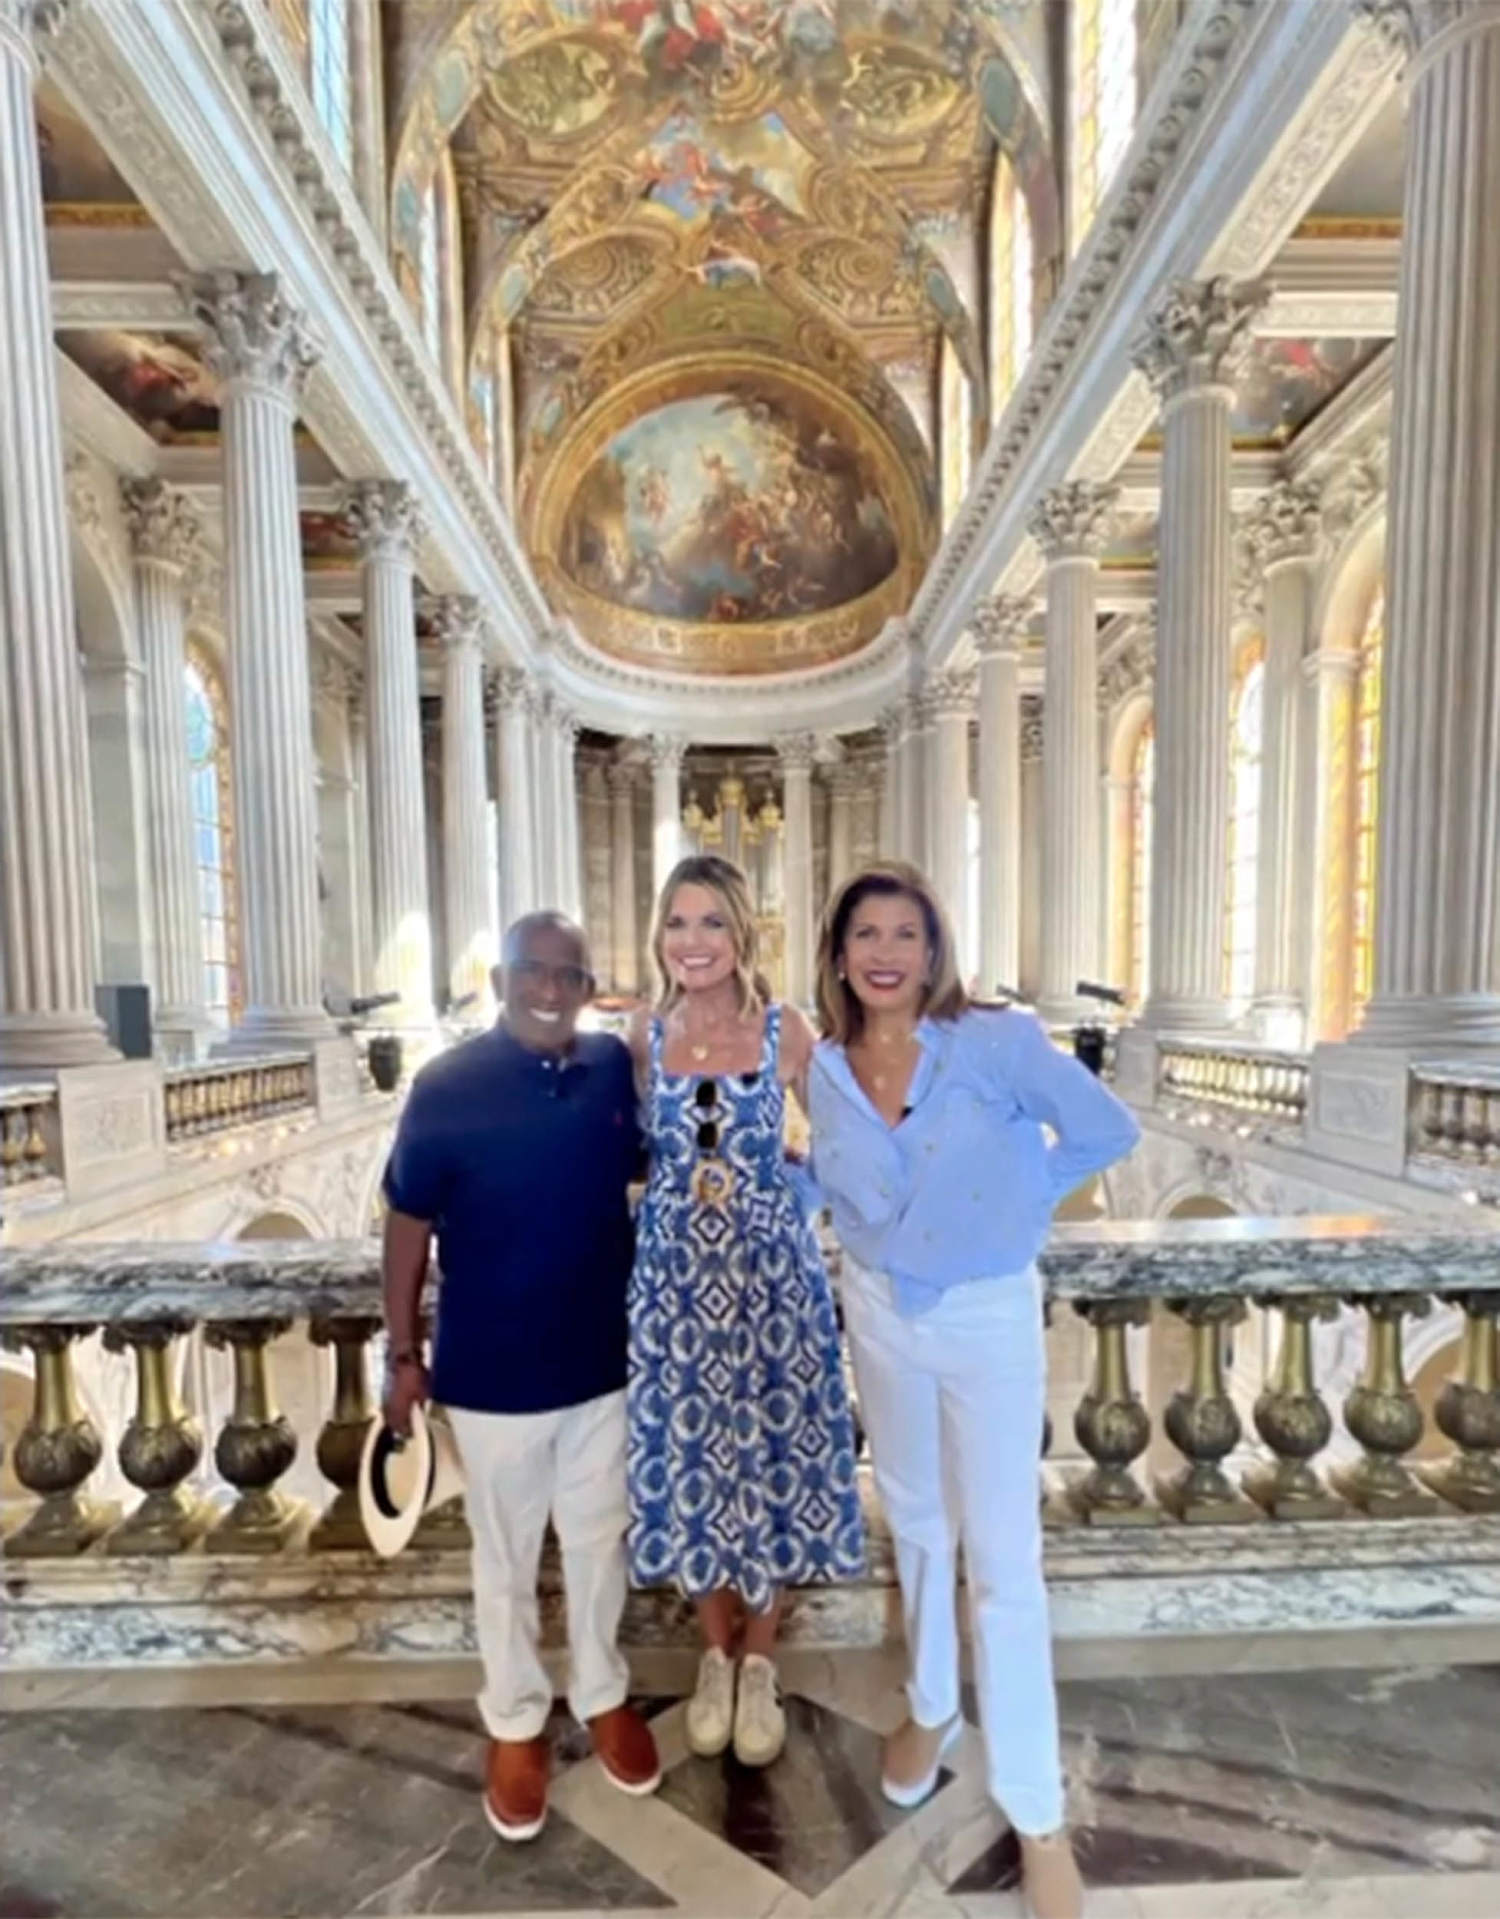 Savannah, Hoda and Al tour Versailles and do something ‘no one’s allowed to do’ – even King Charles III